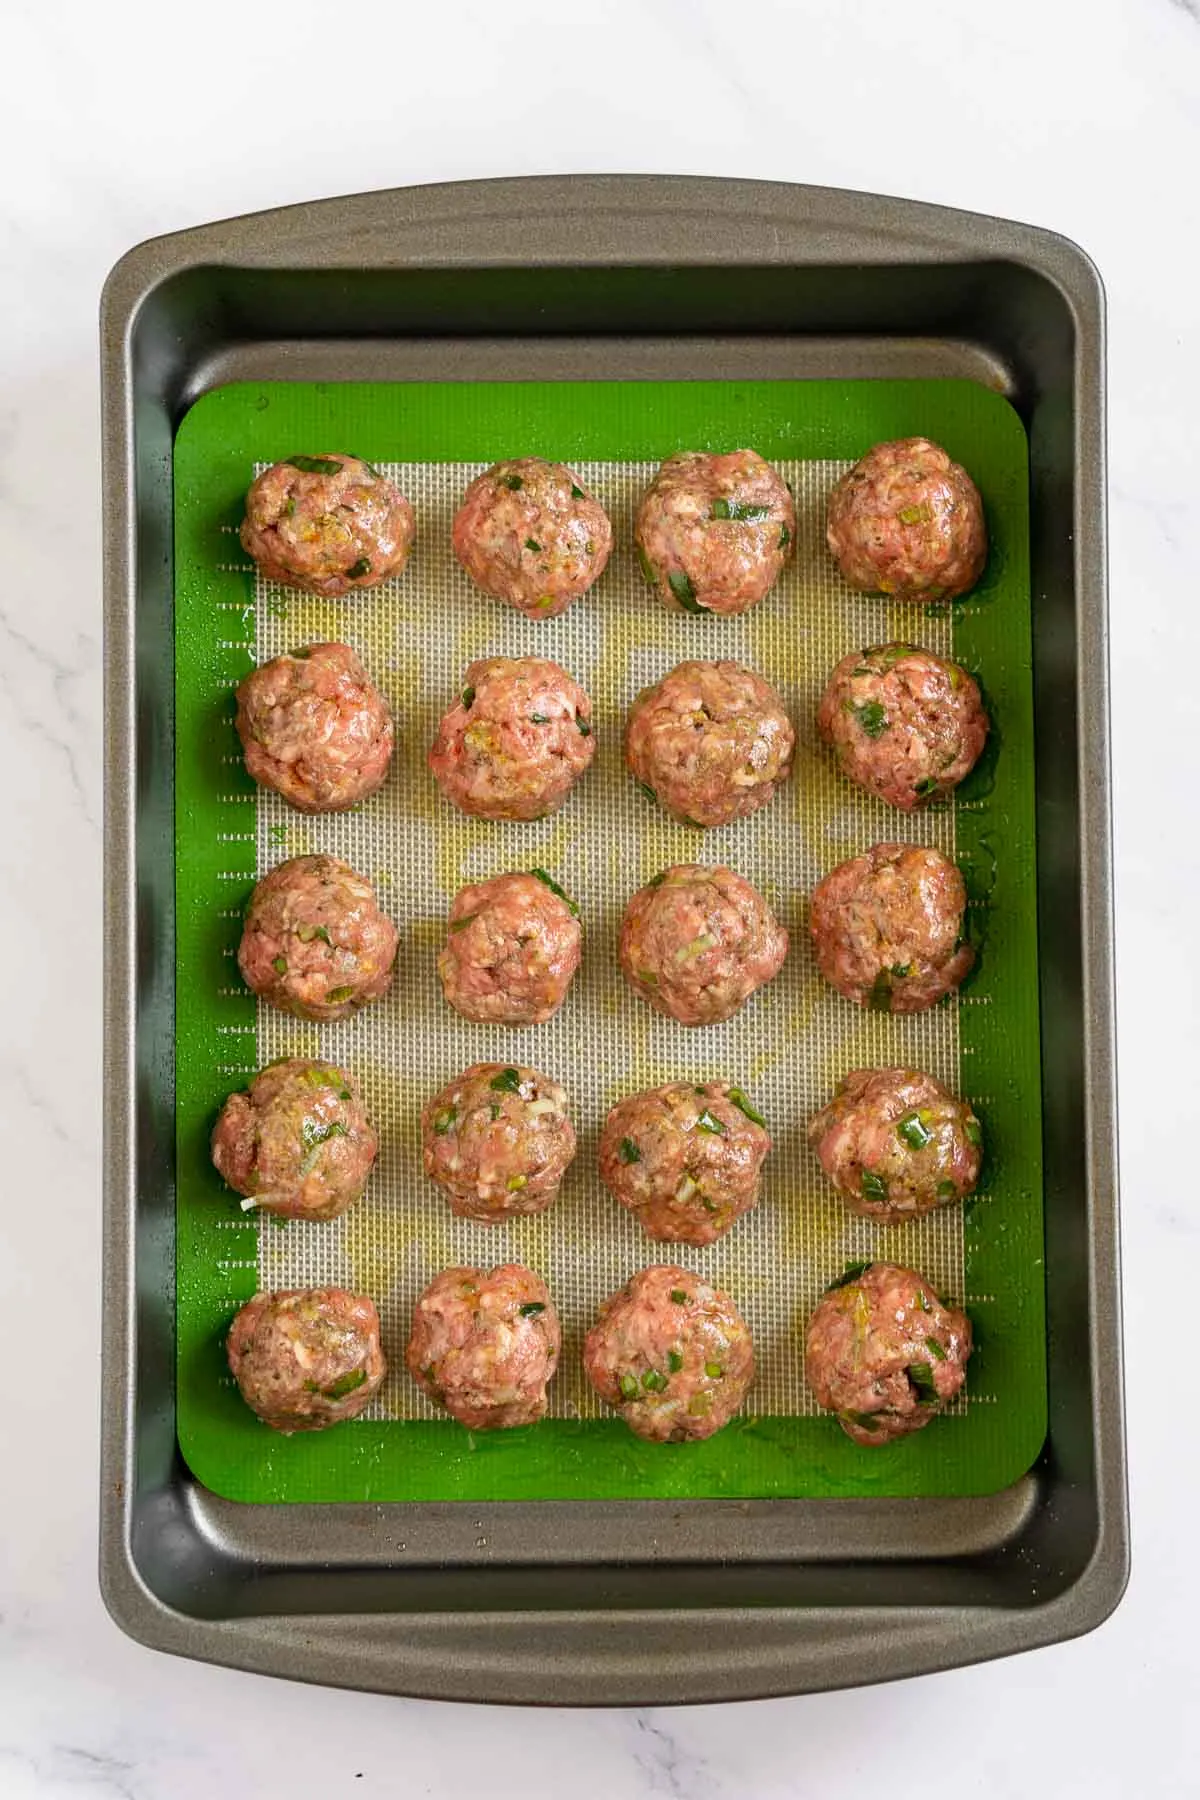 Uncooked bison meatballs on a baking pan